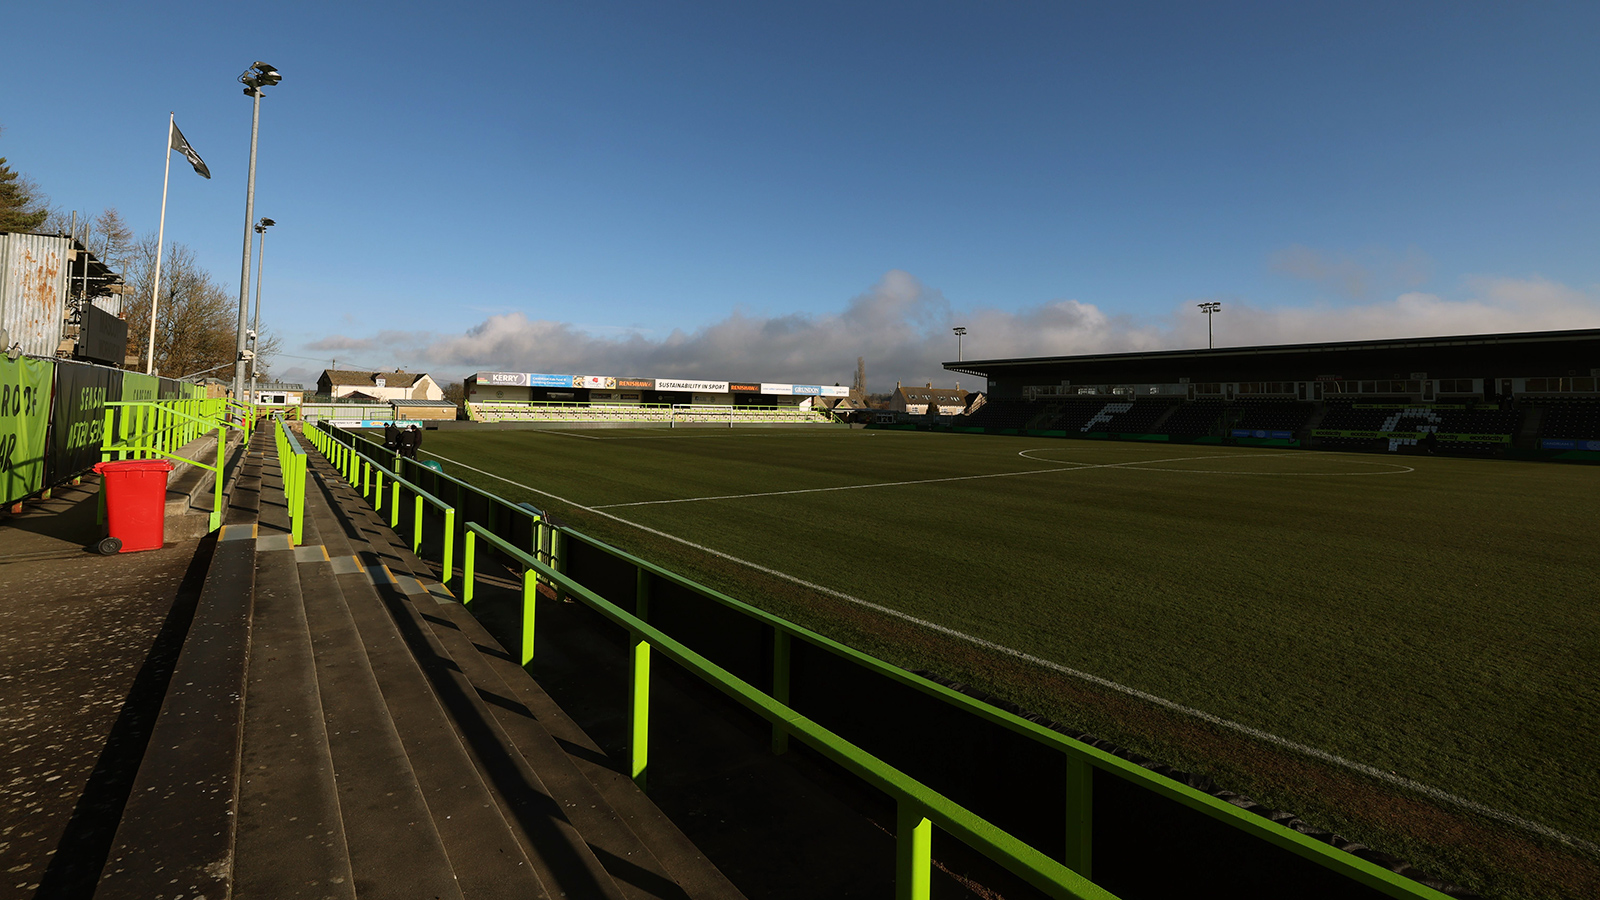 The New Lawn, Forest Green Rovers